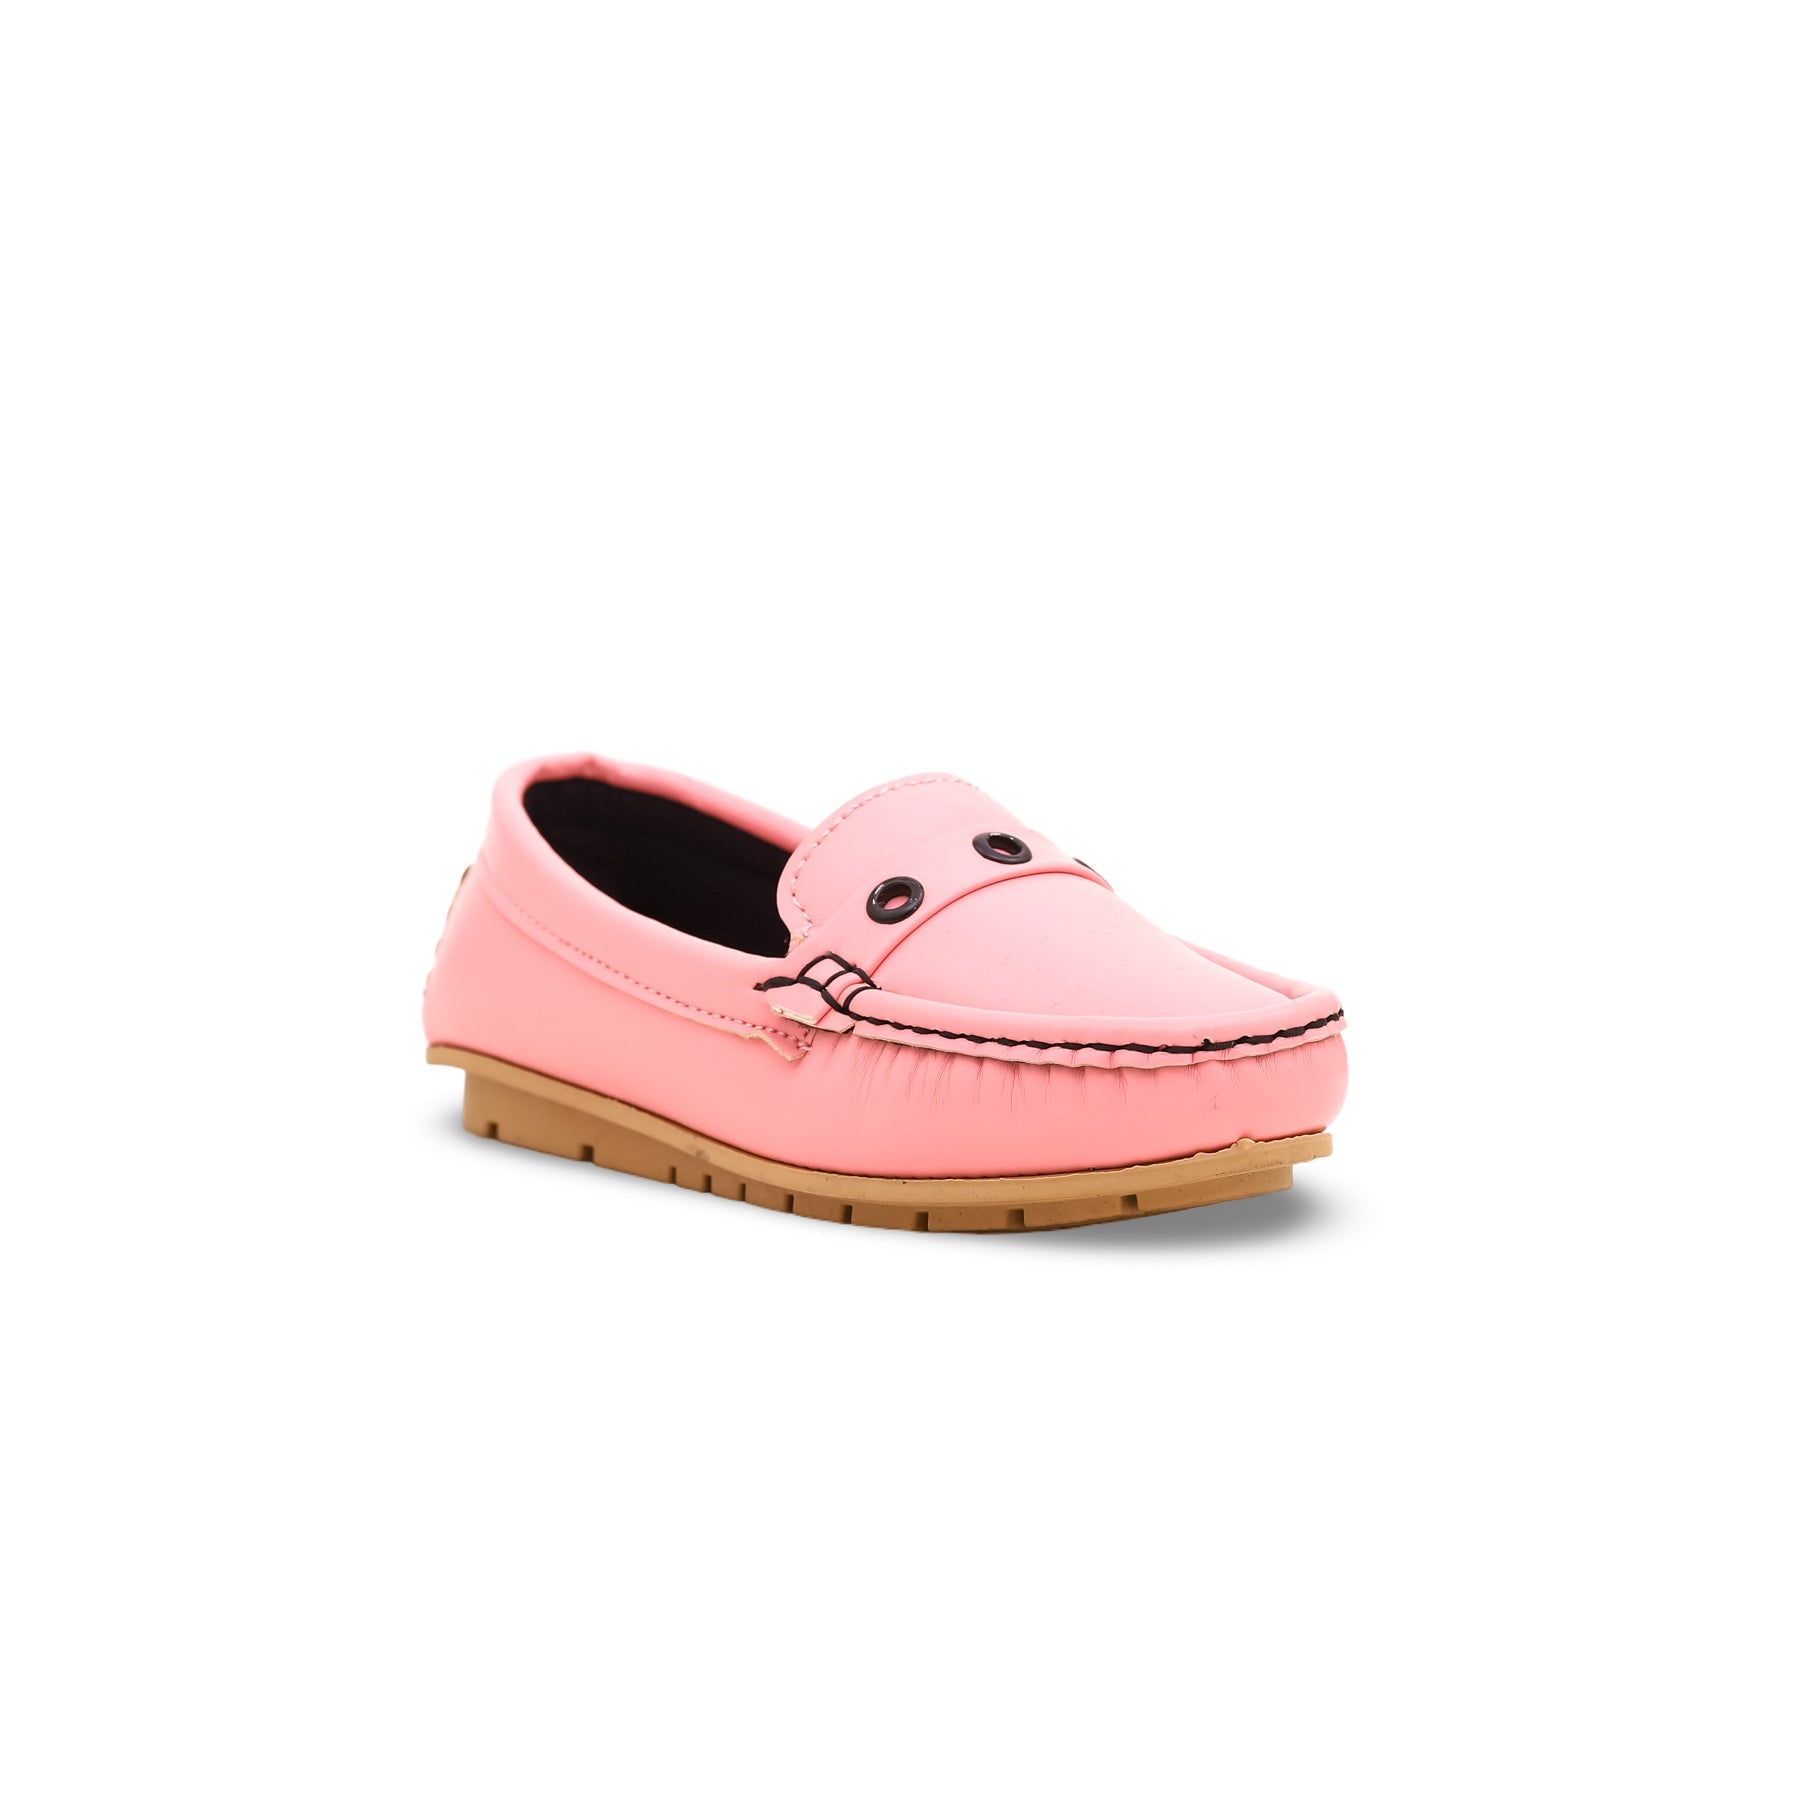 Girls Pink Casual Moccasin KD0752